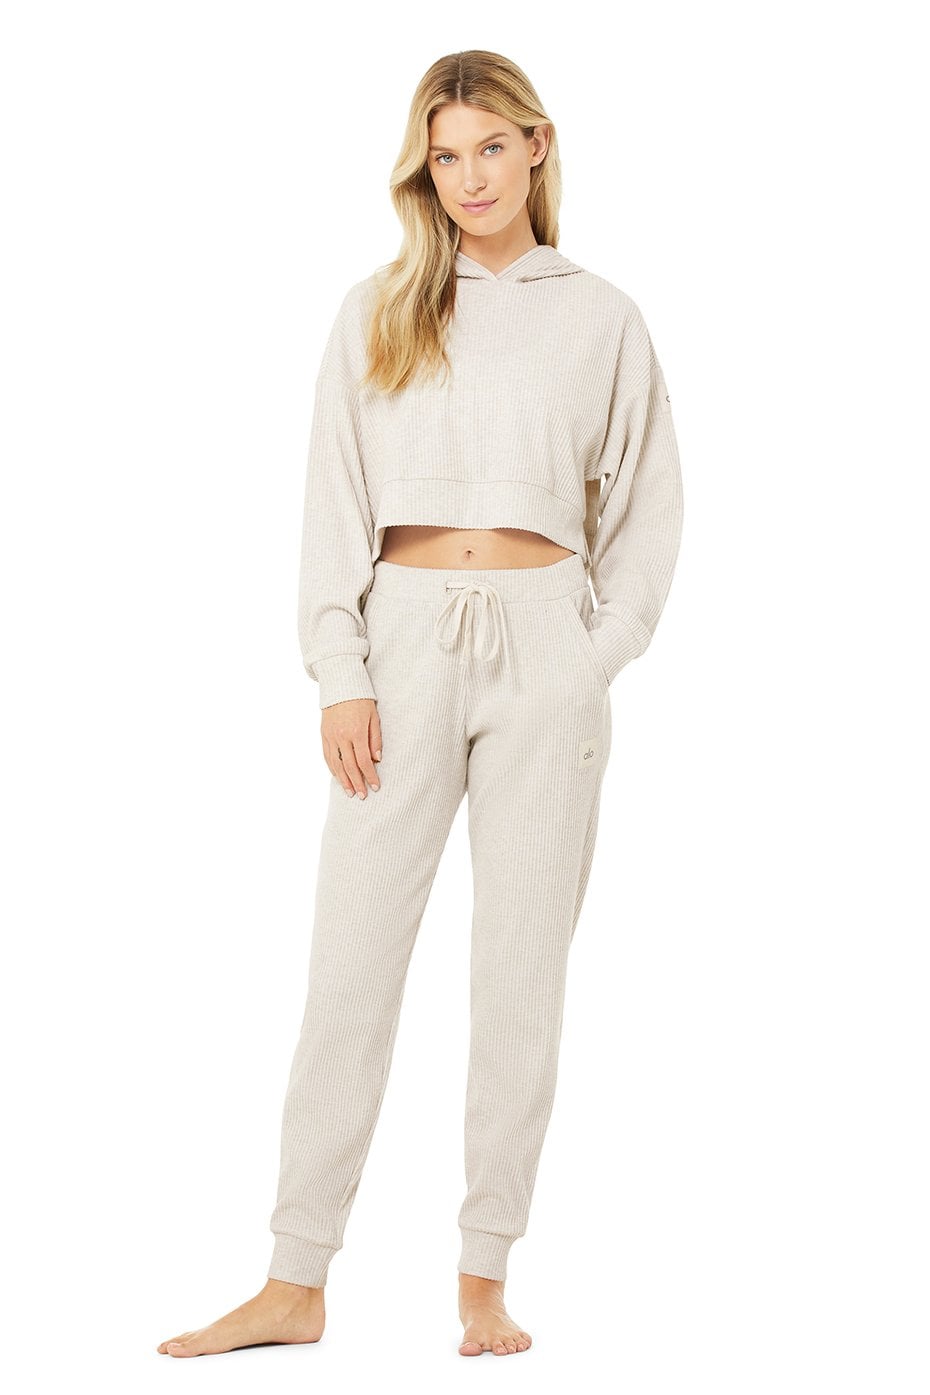 Alo Muse Sweatpant & Hoodie Set, Alo Has a Bunch of Cute Sets You Can Both  Work Out and Lounge In